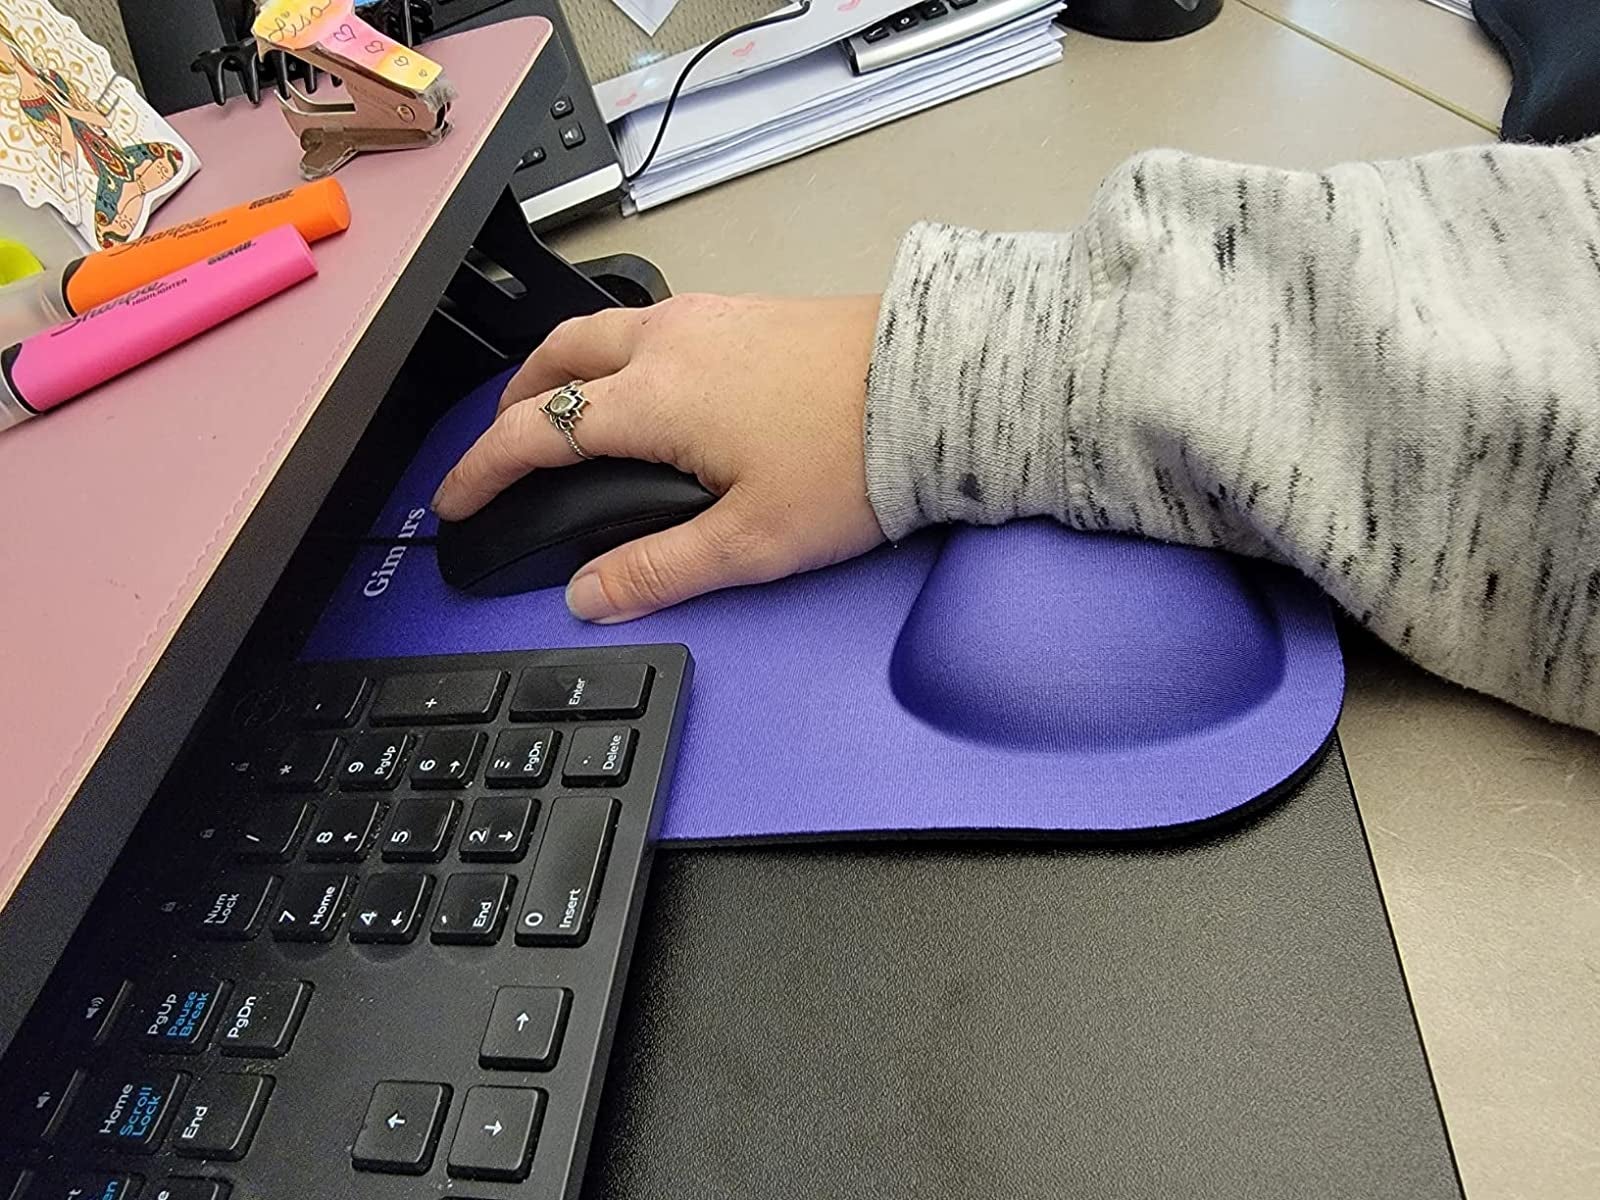 Best Ergonomic Mouse Pads 2022: Mouse Pad With Wrist Support Reviews